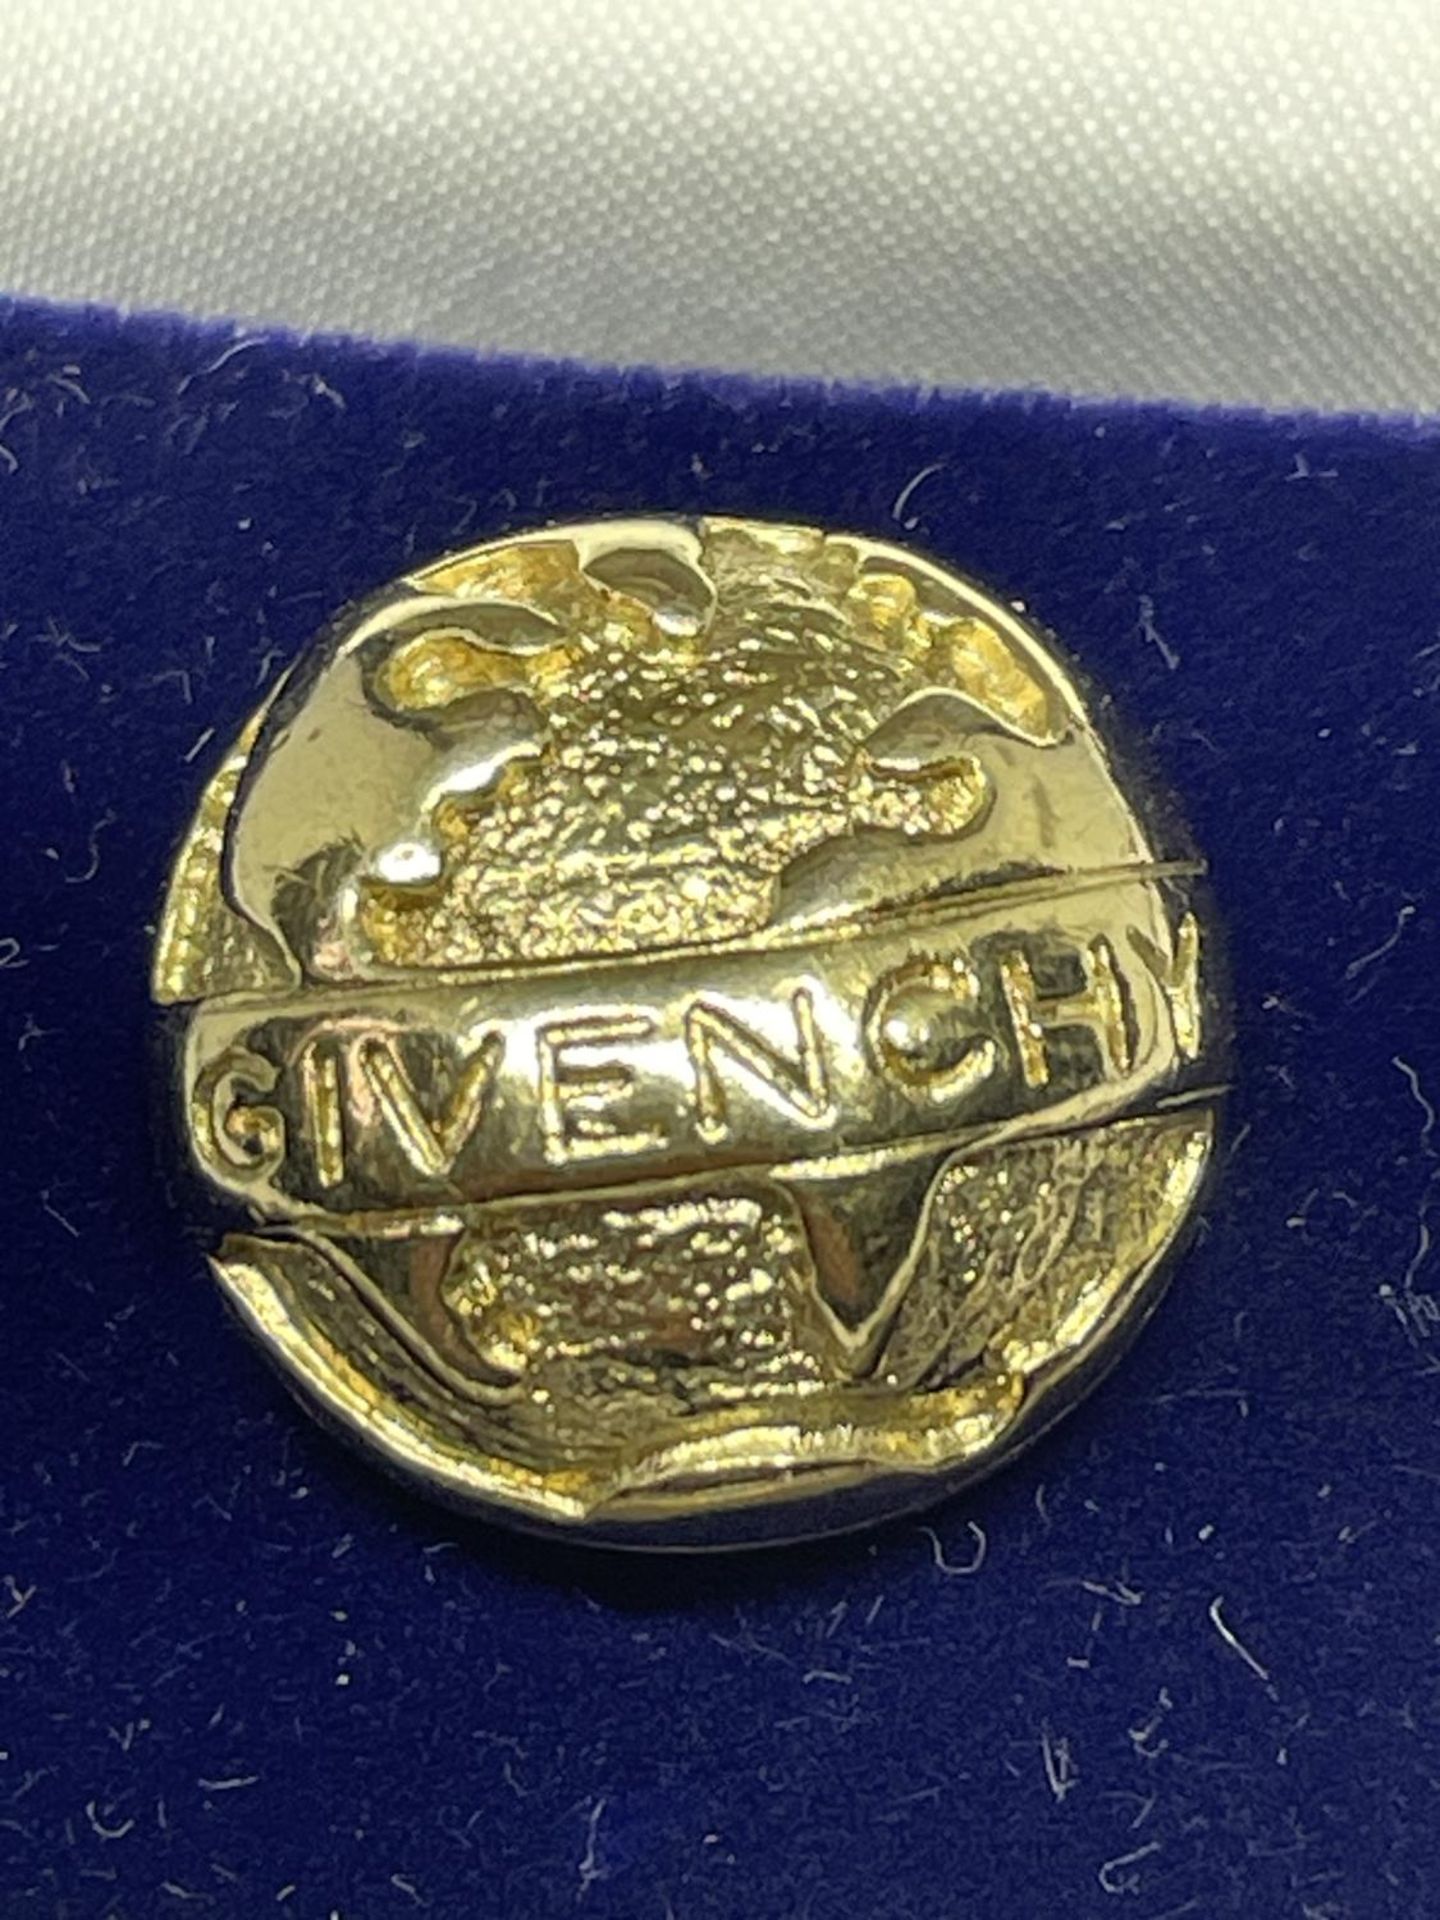 A LADIES BOXED GIVENCHY DESIGNER PIN - Image 2 of 2